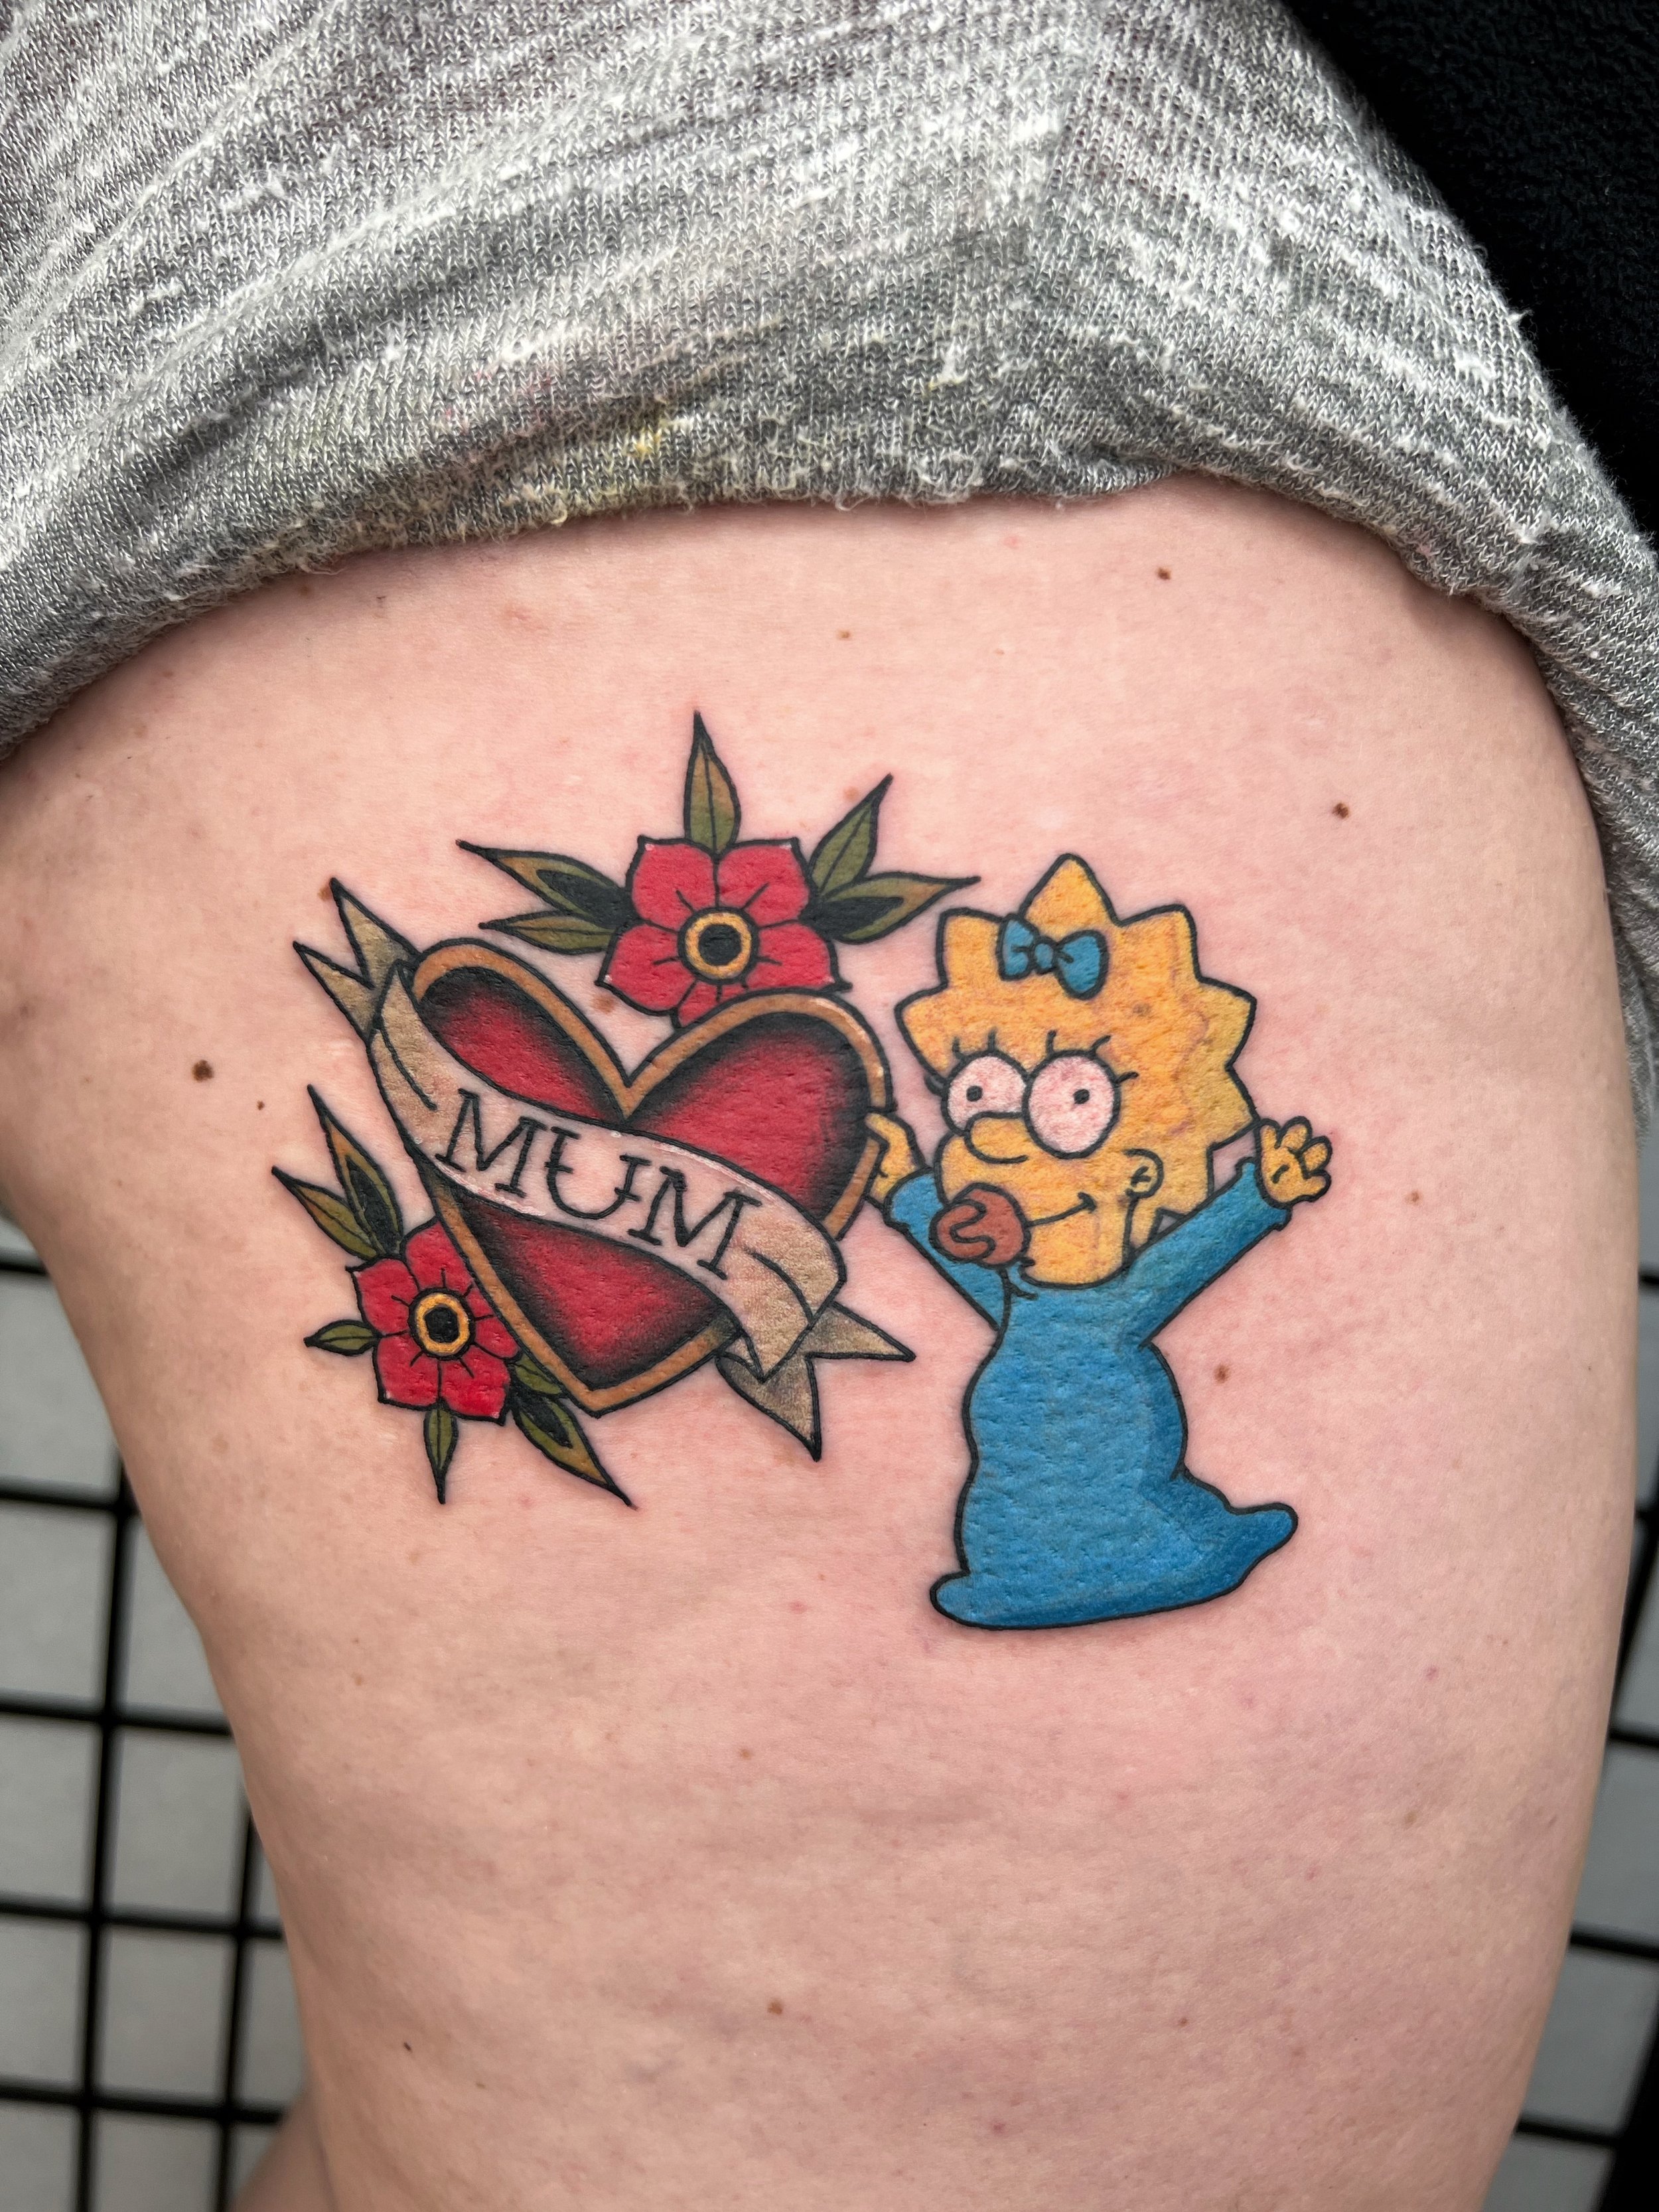 55Amazing Simpsons Tattoo Designs with Meanings Ideas and Celebrities   Body Art Guru